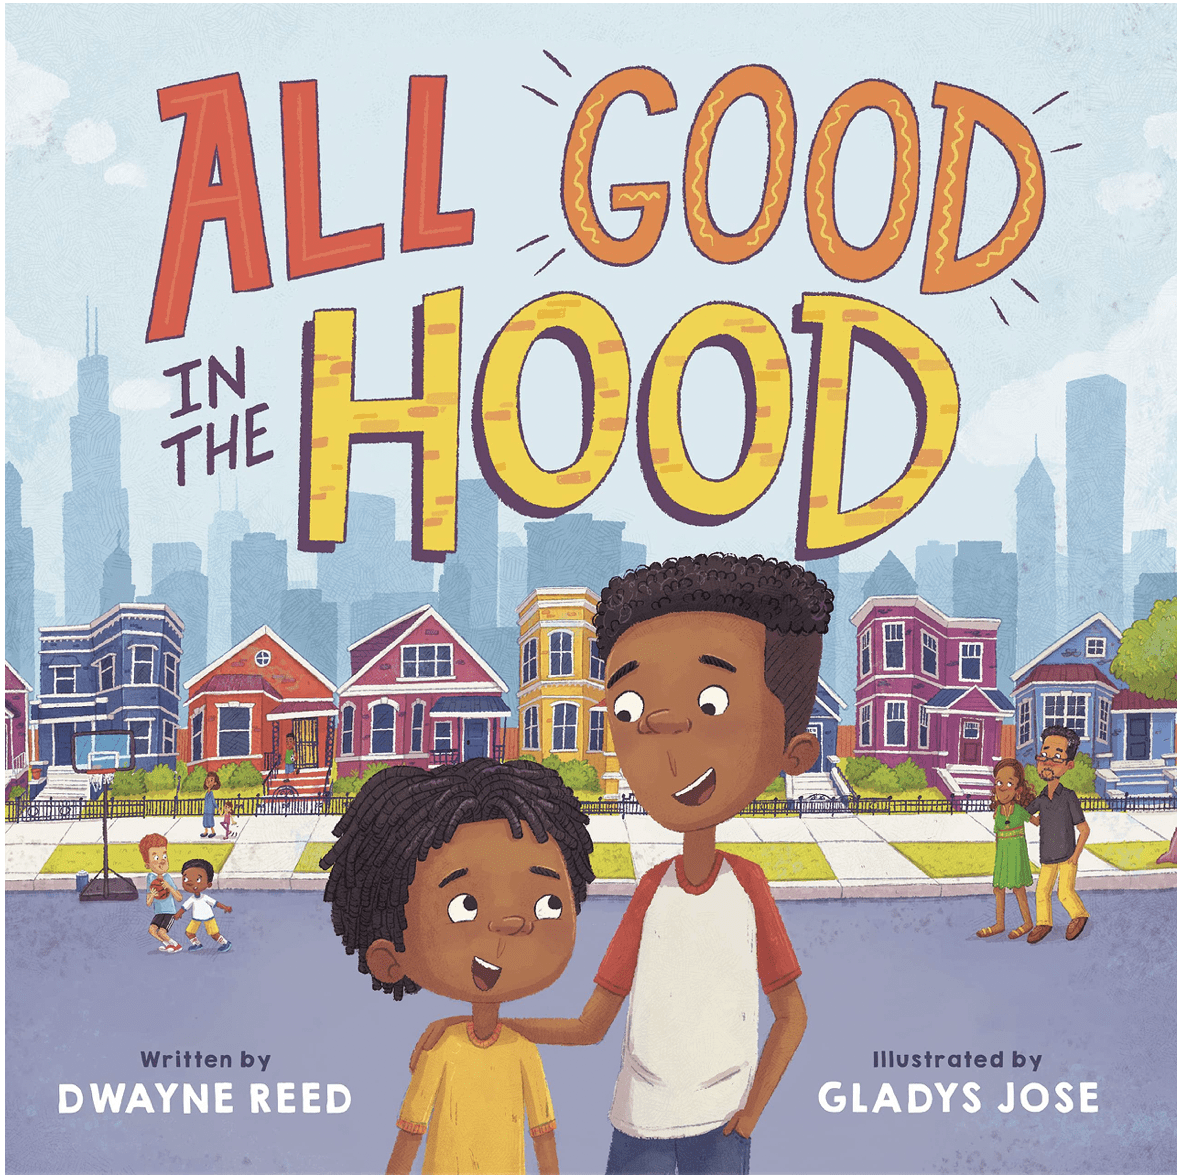 Cover of All Good in the Hood by Dwayne Reed. Background is a neighborhood with a sunny sky, and in the foreground are two black boys, one younger than the other, smiling at each other- Black Children’s Book Authors 